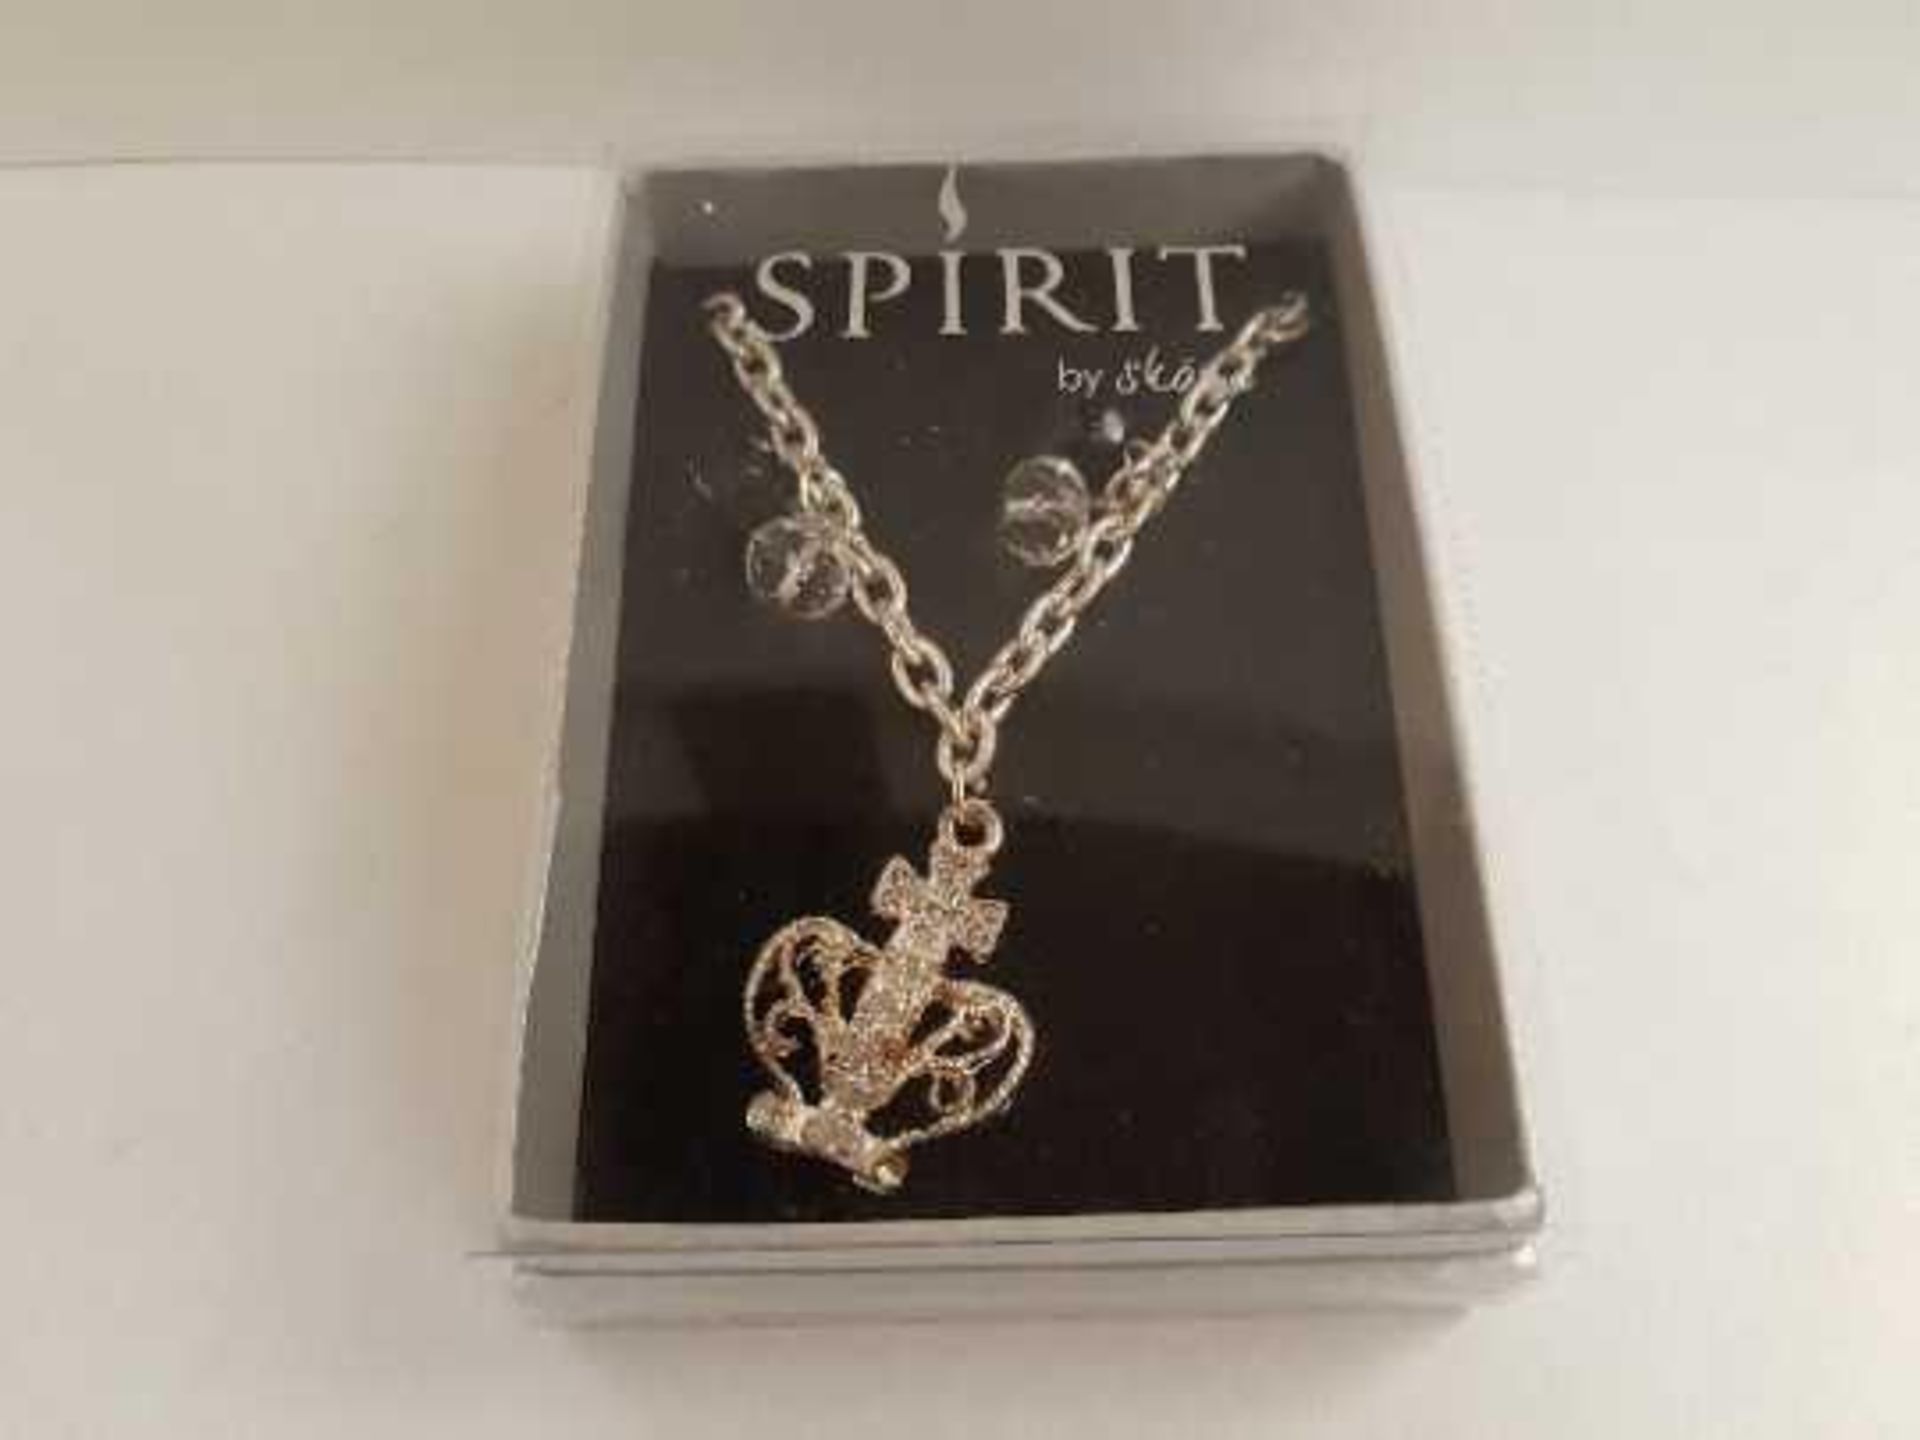 Spirit necklace, new in display box, see picture for design.